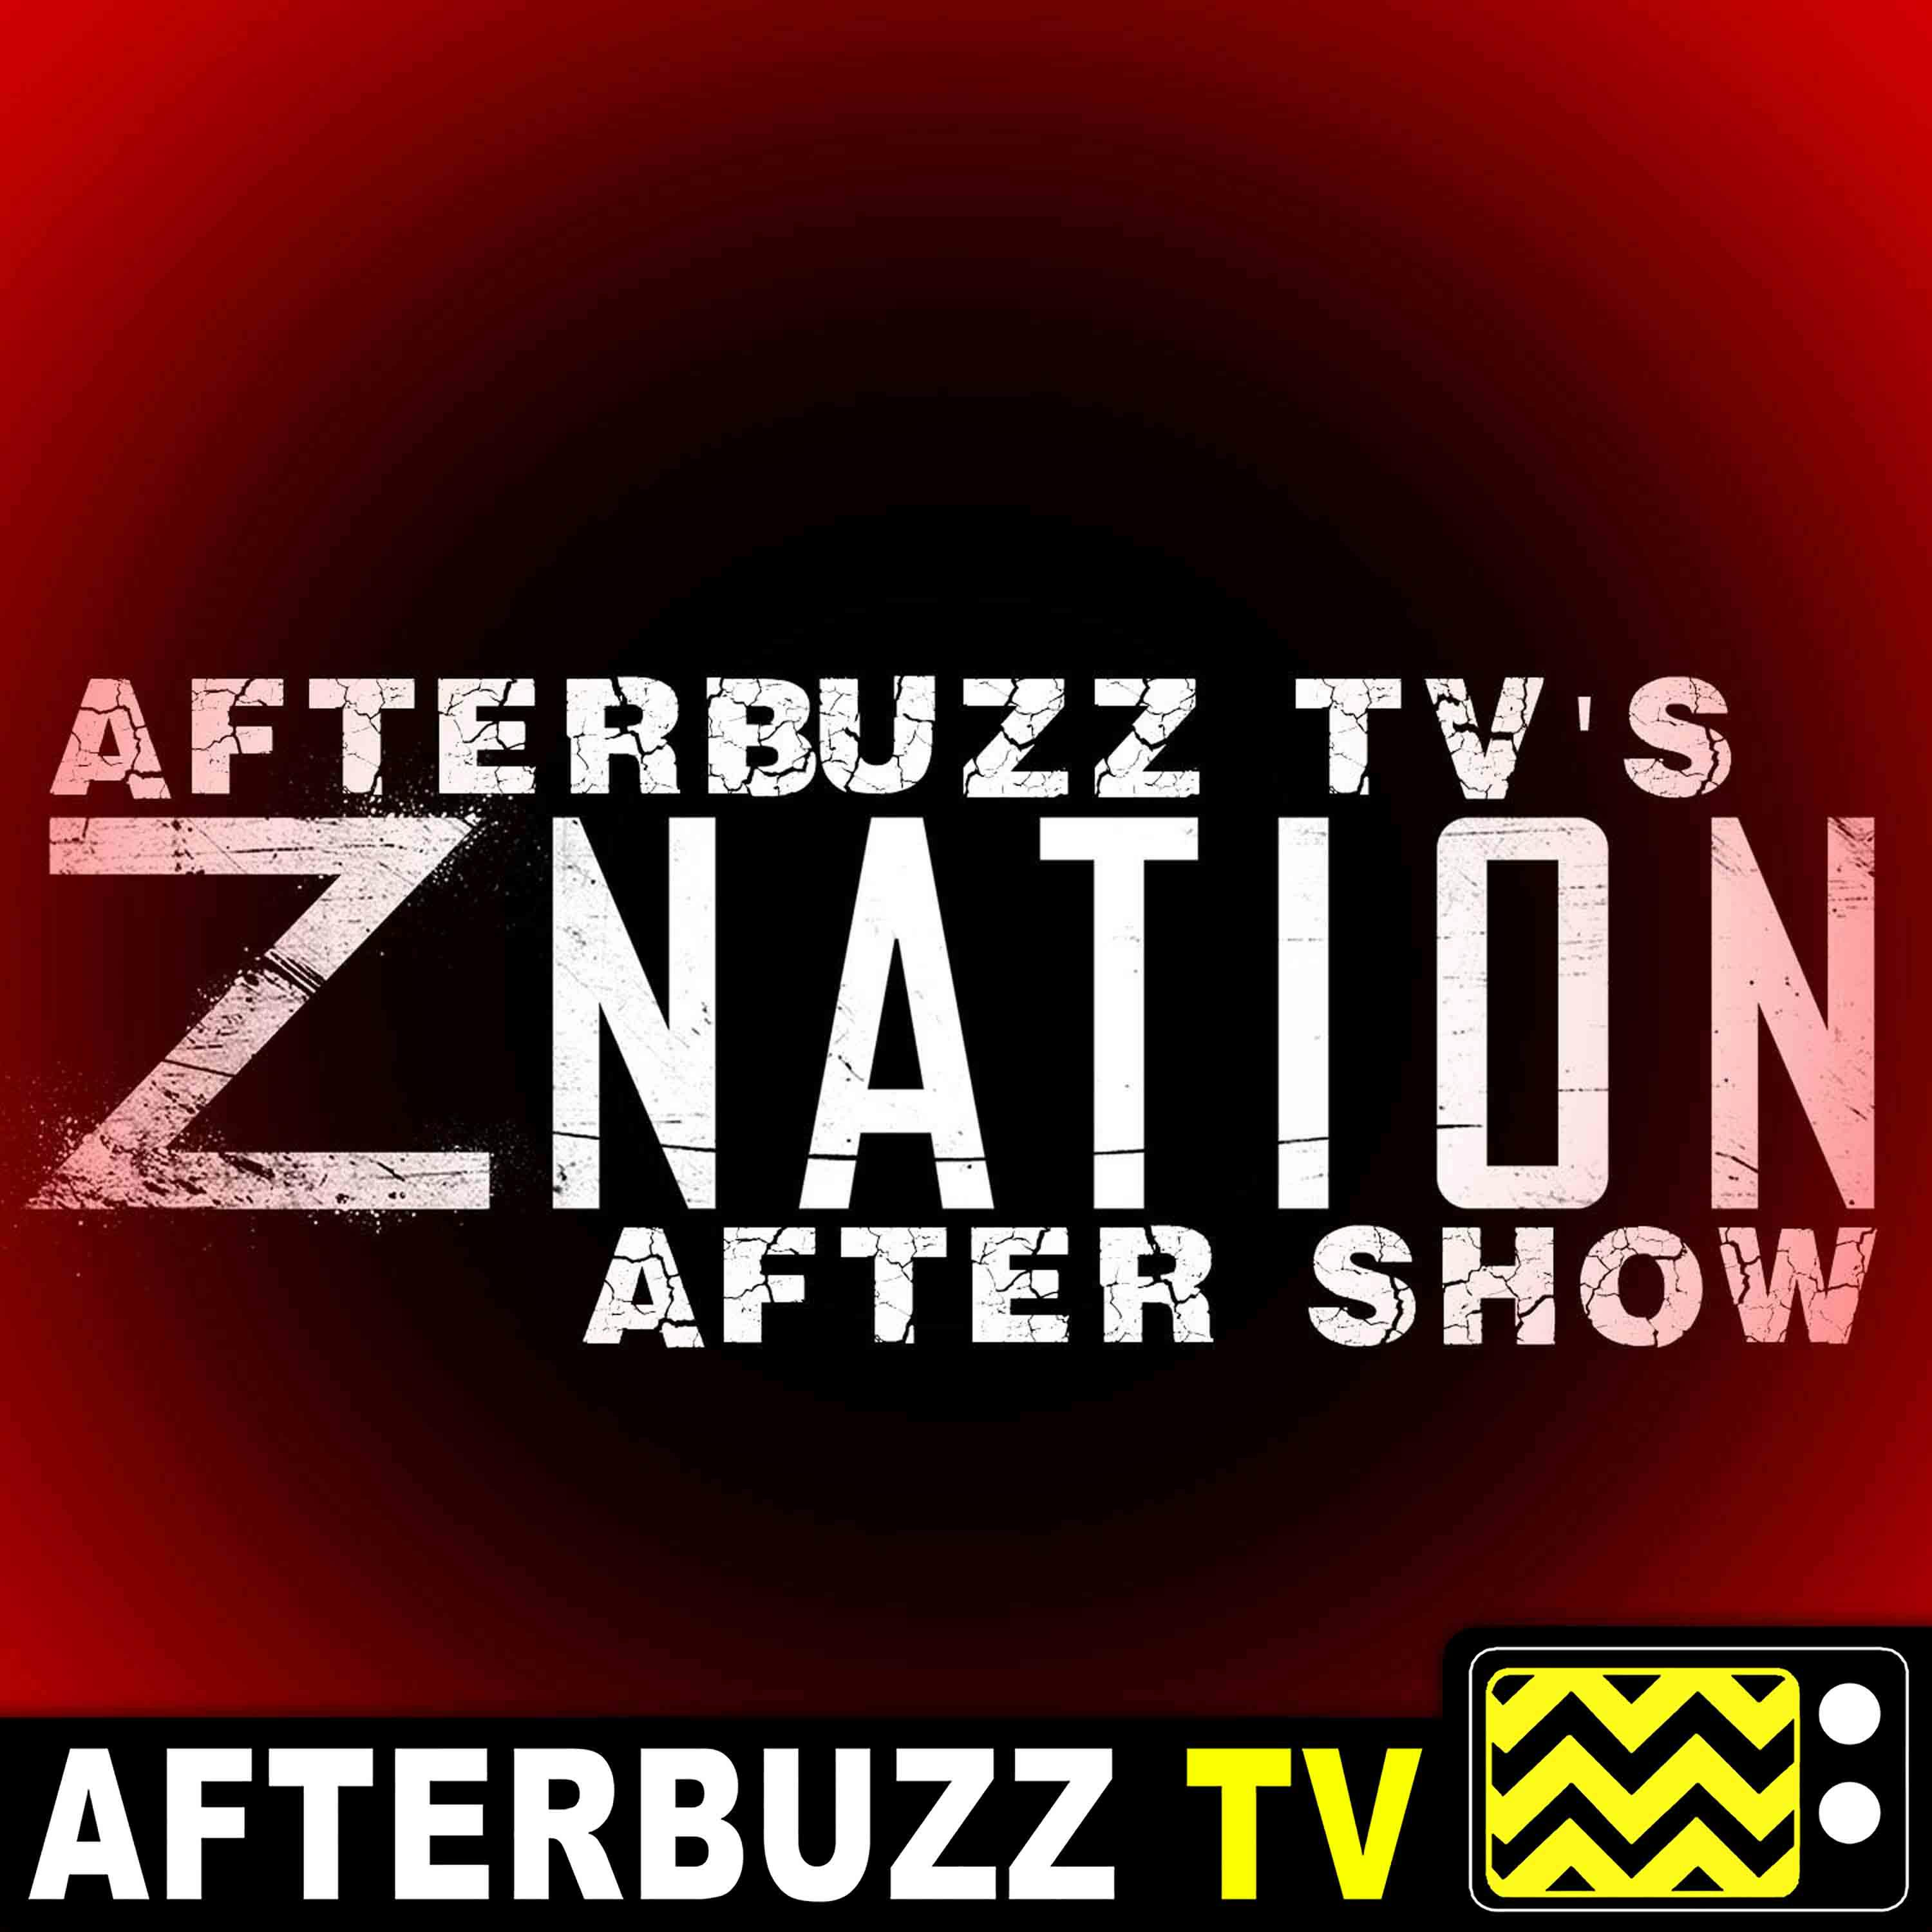 Katy O'Brian Guests on Z Nation S:5 Doc's Stoned History E:7 Review